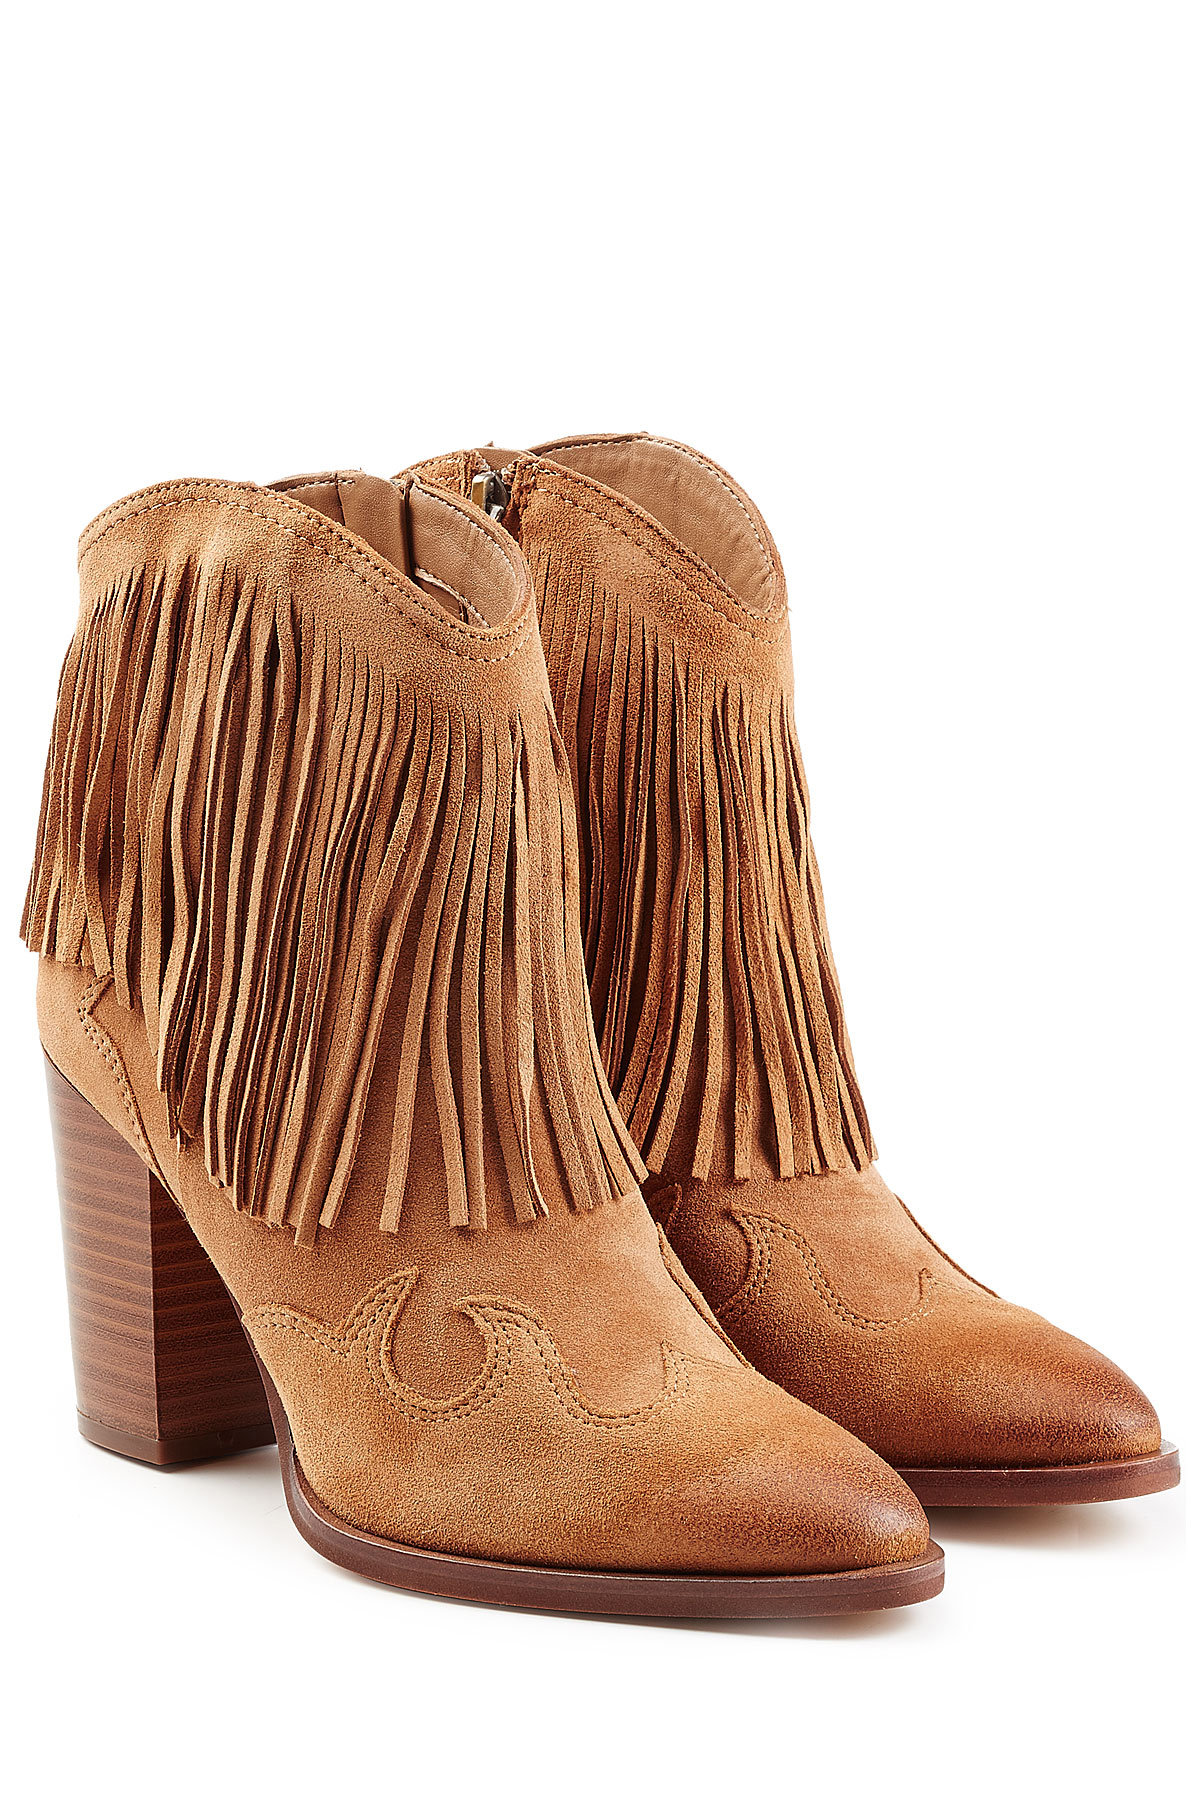 Suede Ankle Boots with Fringe by Sam Edelman